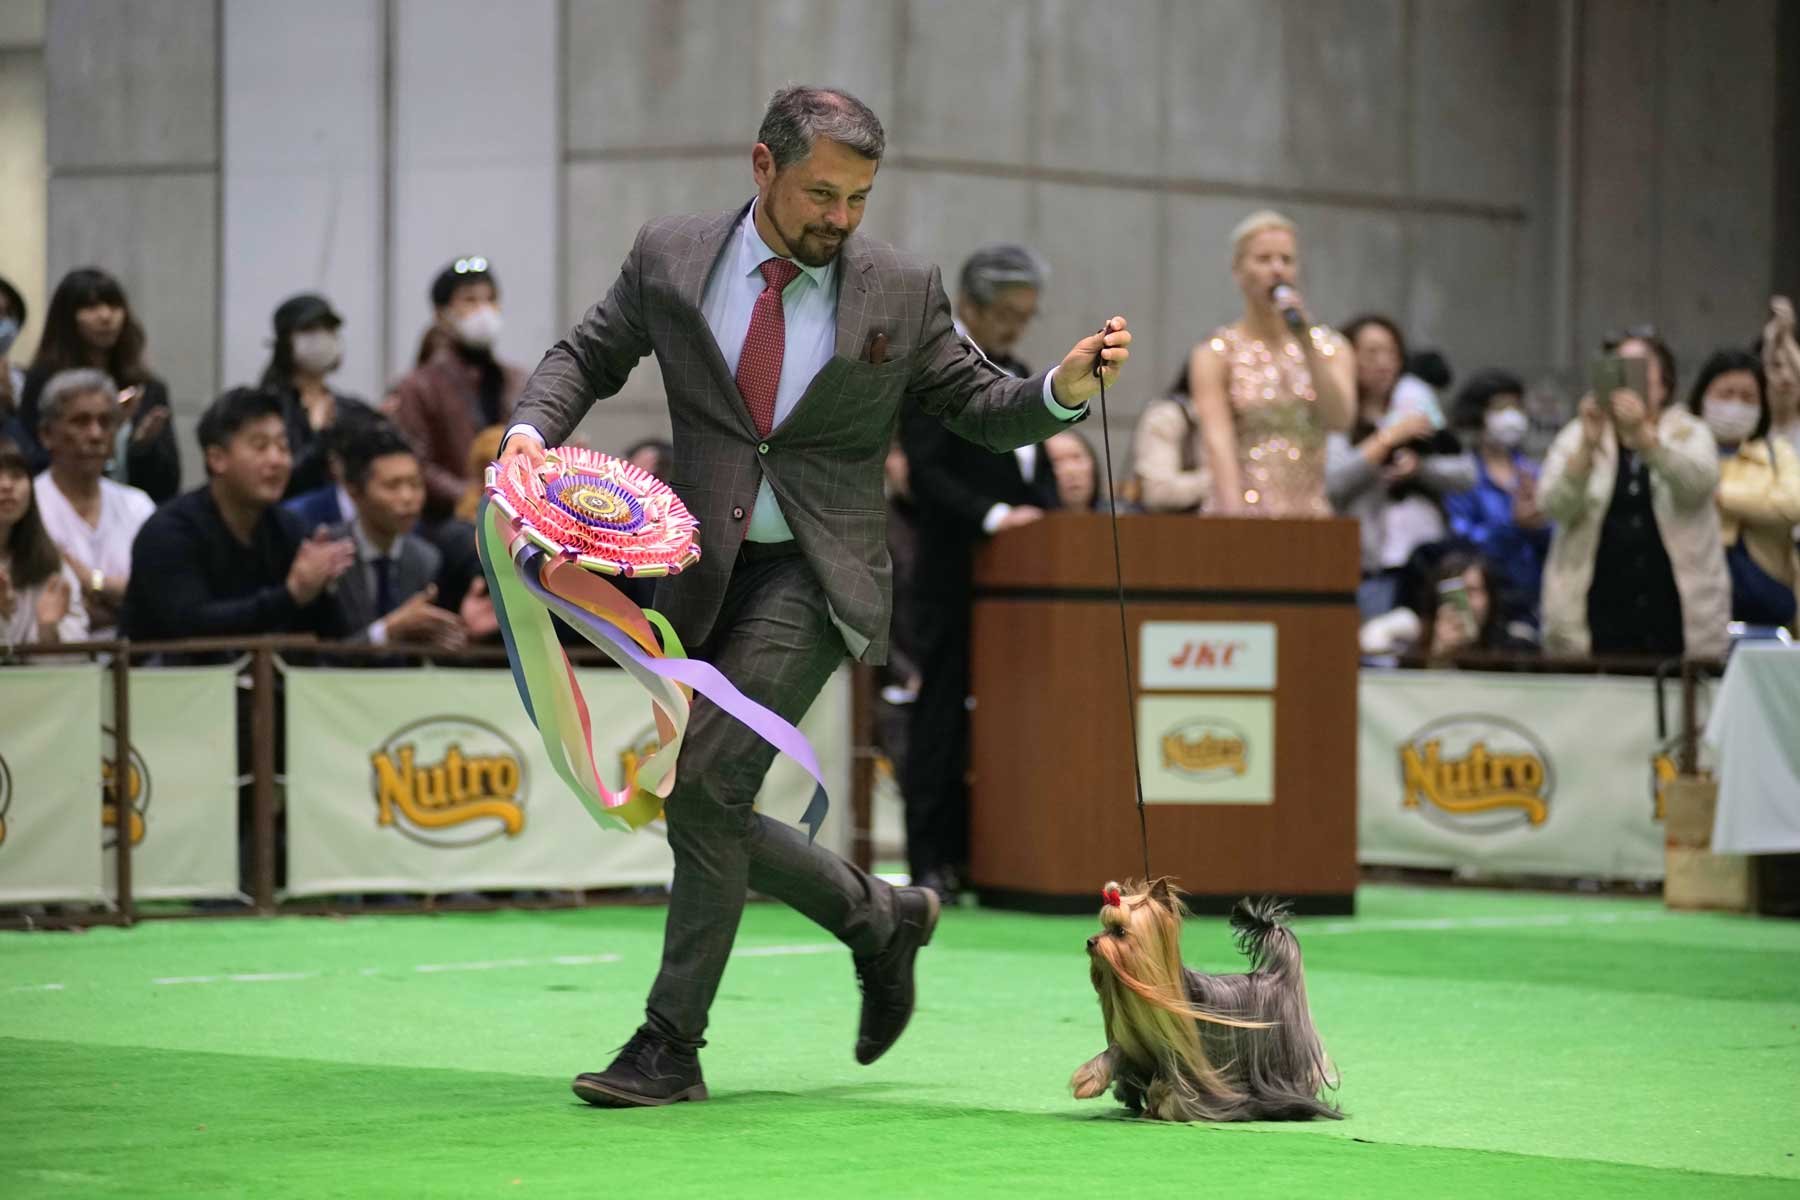 Japan's pooches put their best paw forward